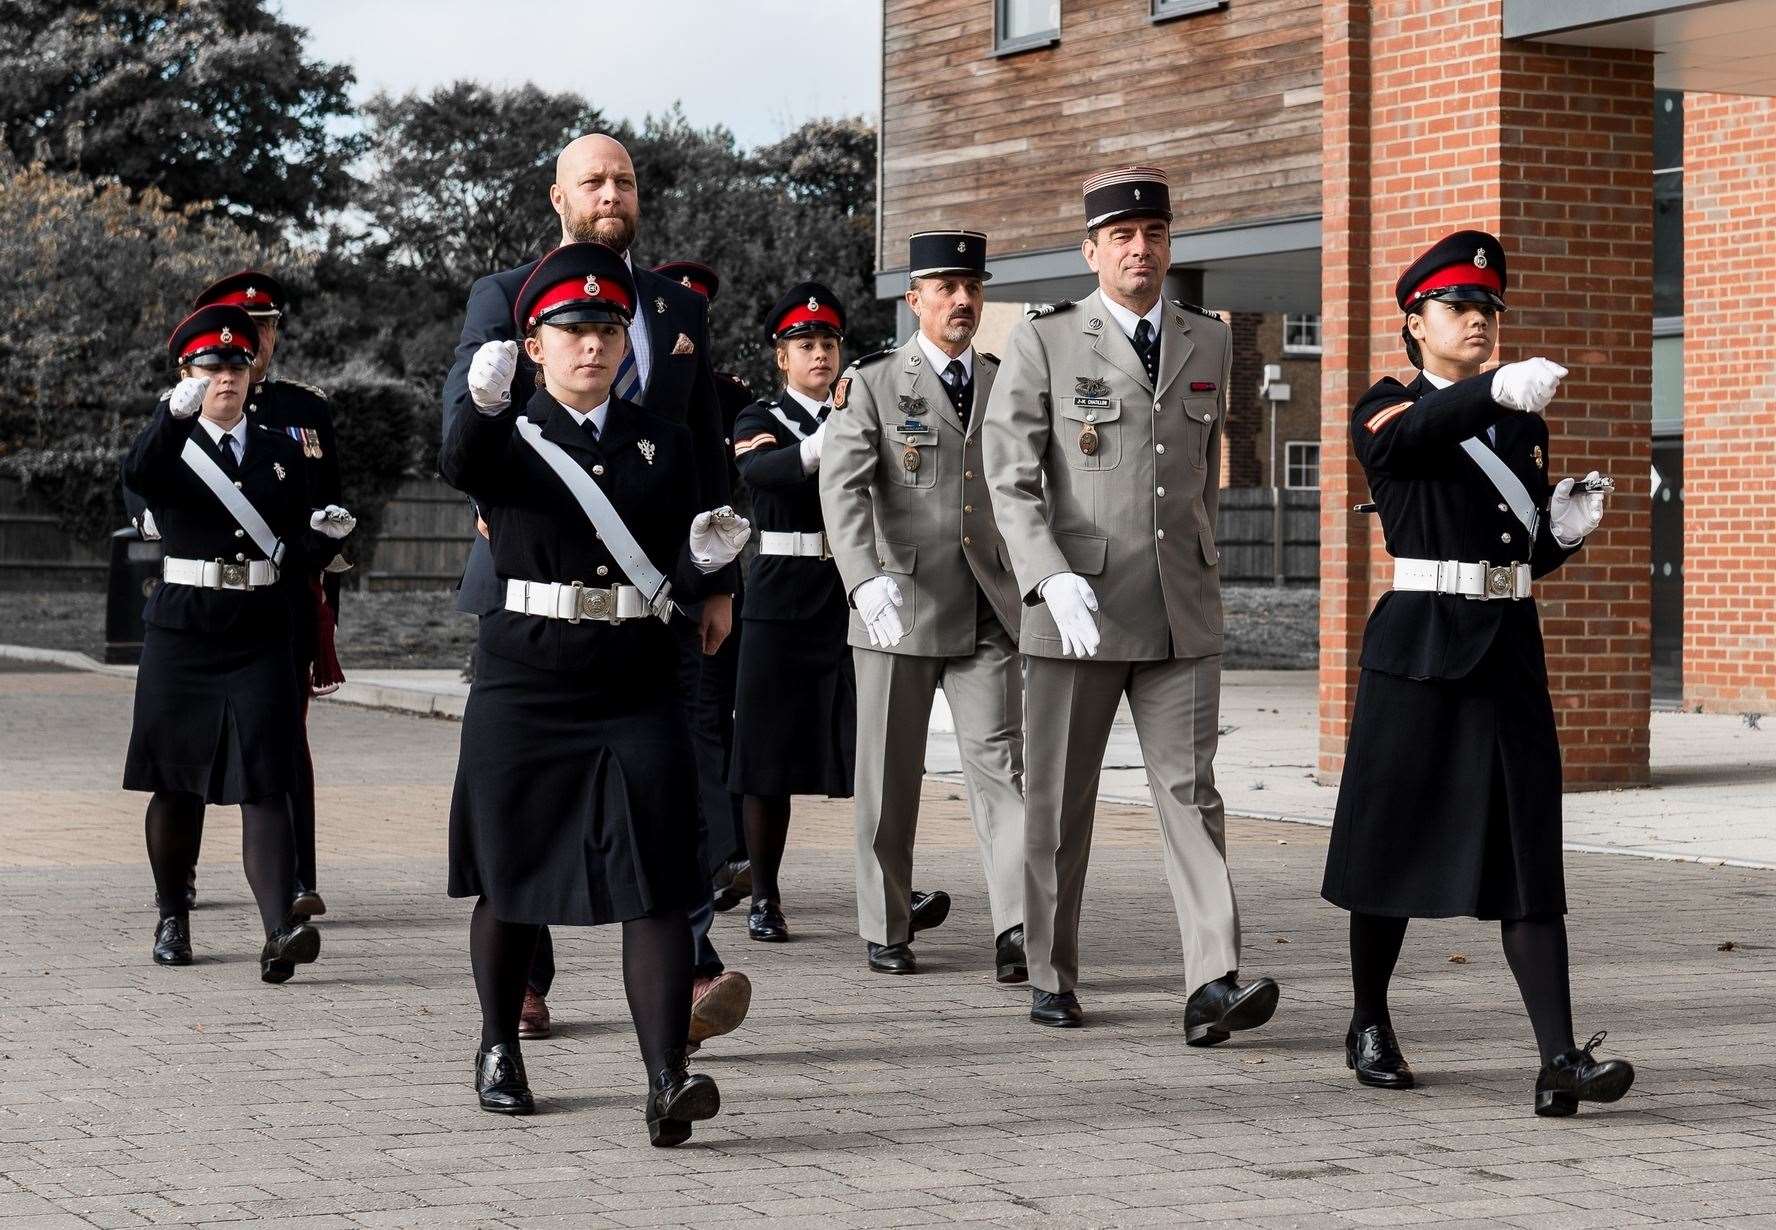 The last exchange visit between the DOYRMS and its French counterpart, October 2017. Dukies with, from left, Alex Foreman, Adjutant Chief Lionel Racape and Commandant ColonelJean-Marc Chatillon. Picture: Duke of York's Royal Military School.